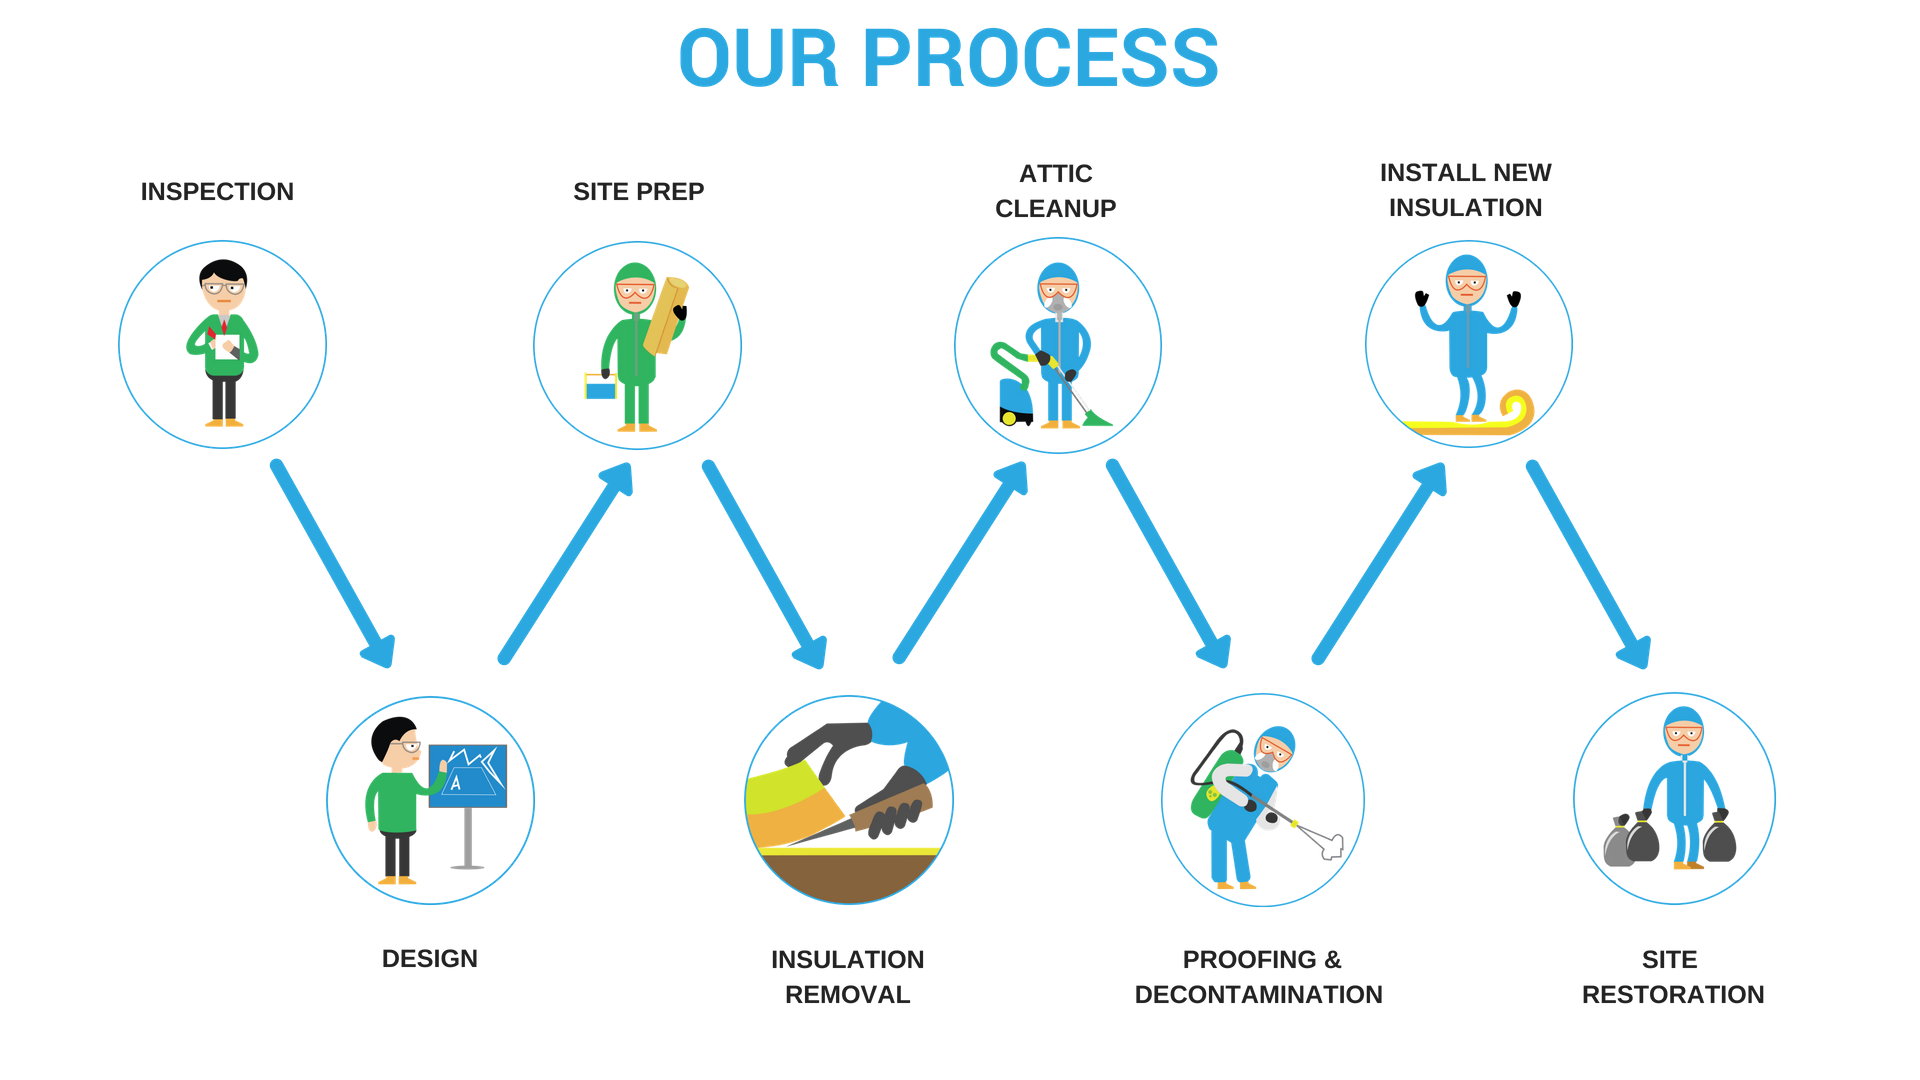 Our Process